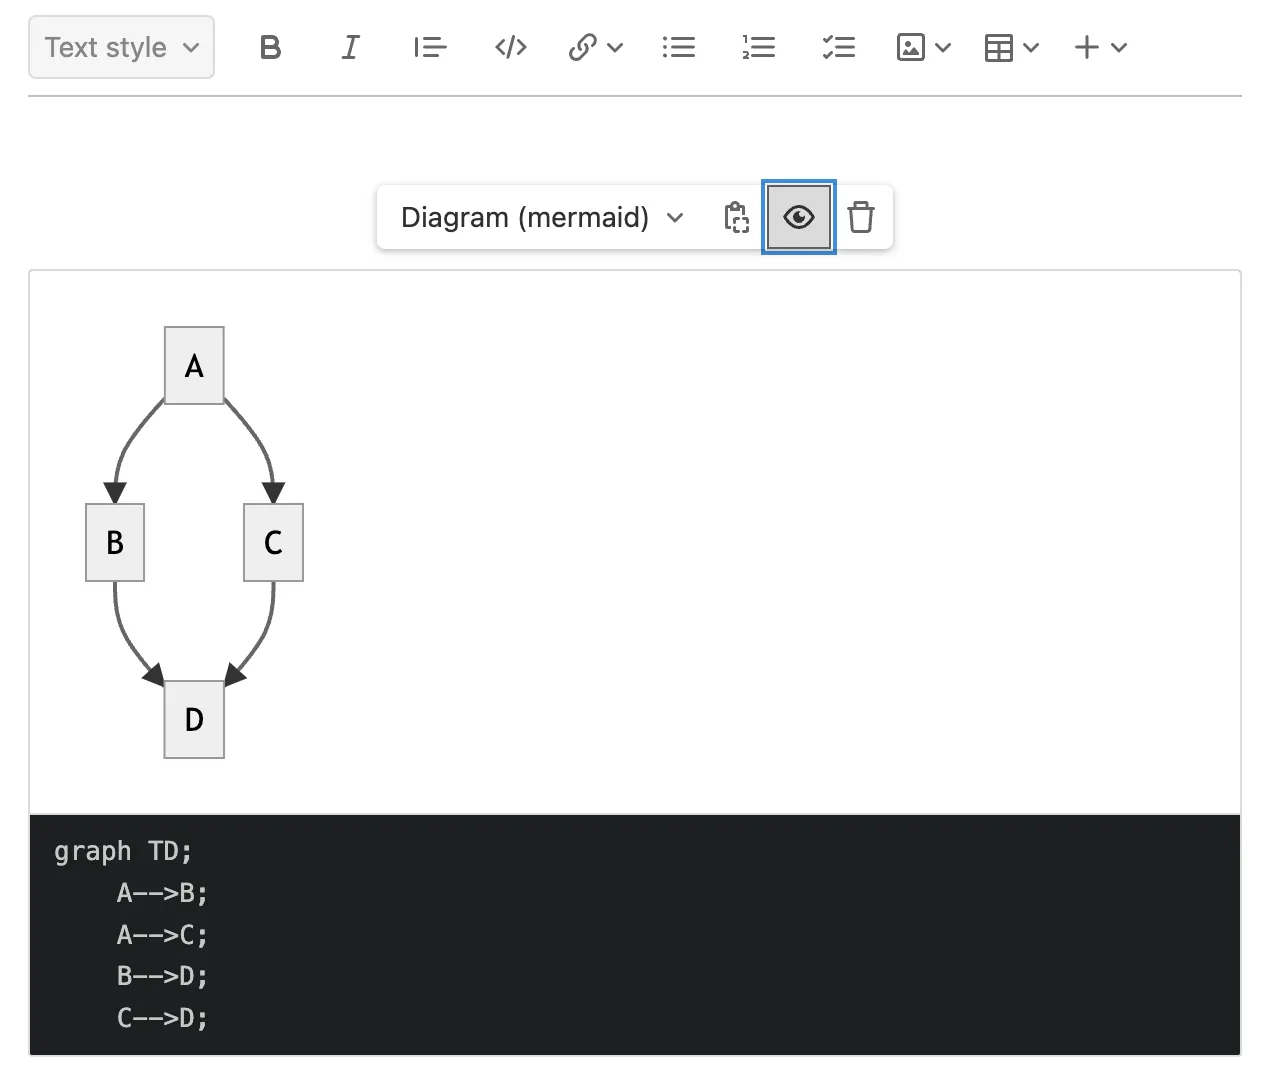 https://about.gitlab.com/images/15_2/create-preview-diagrams-in-wysiwyg.png